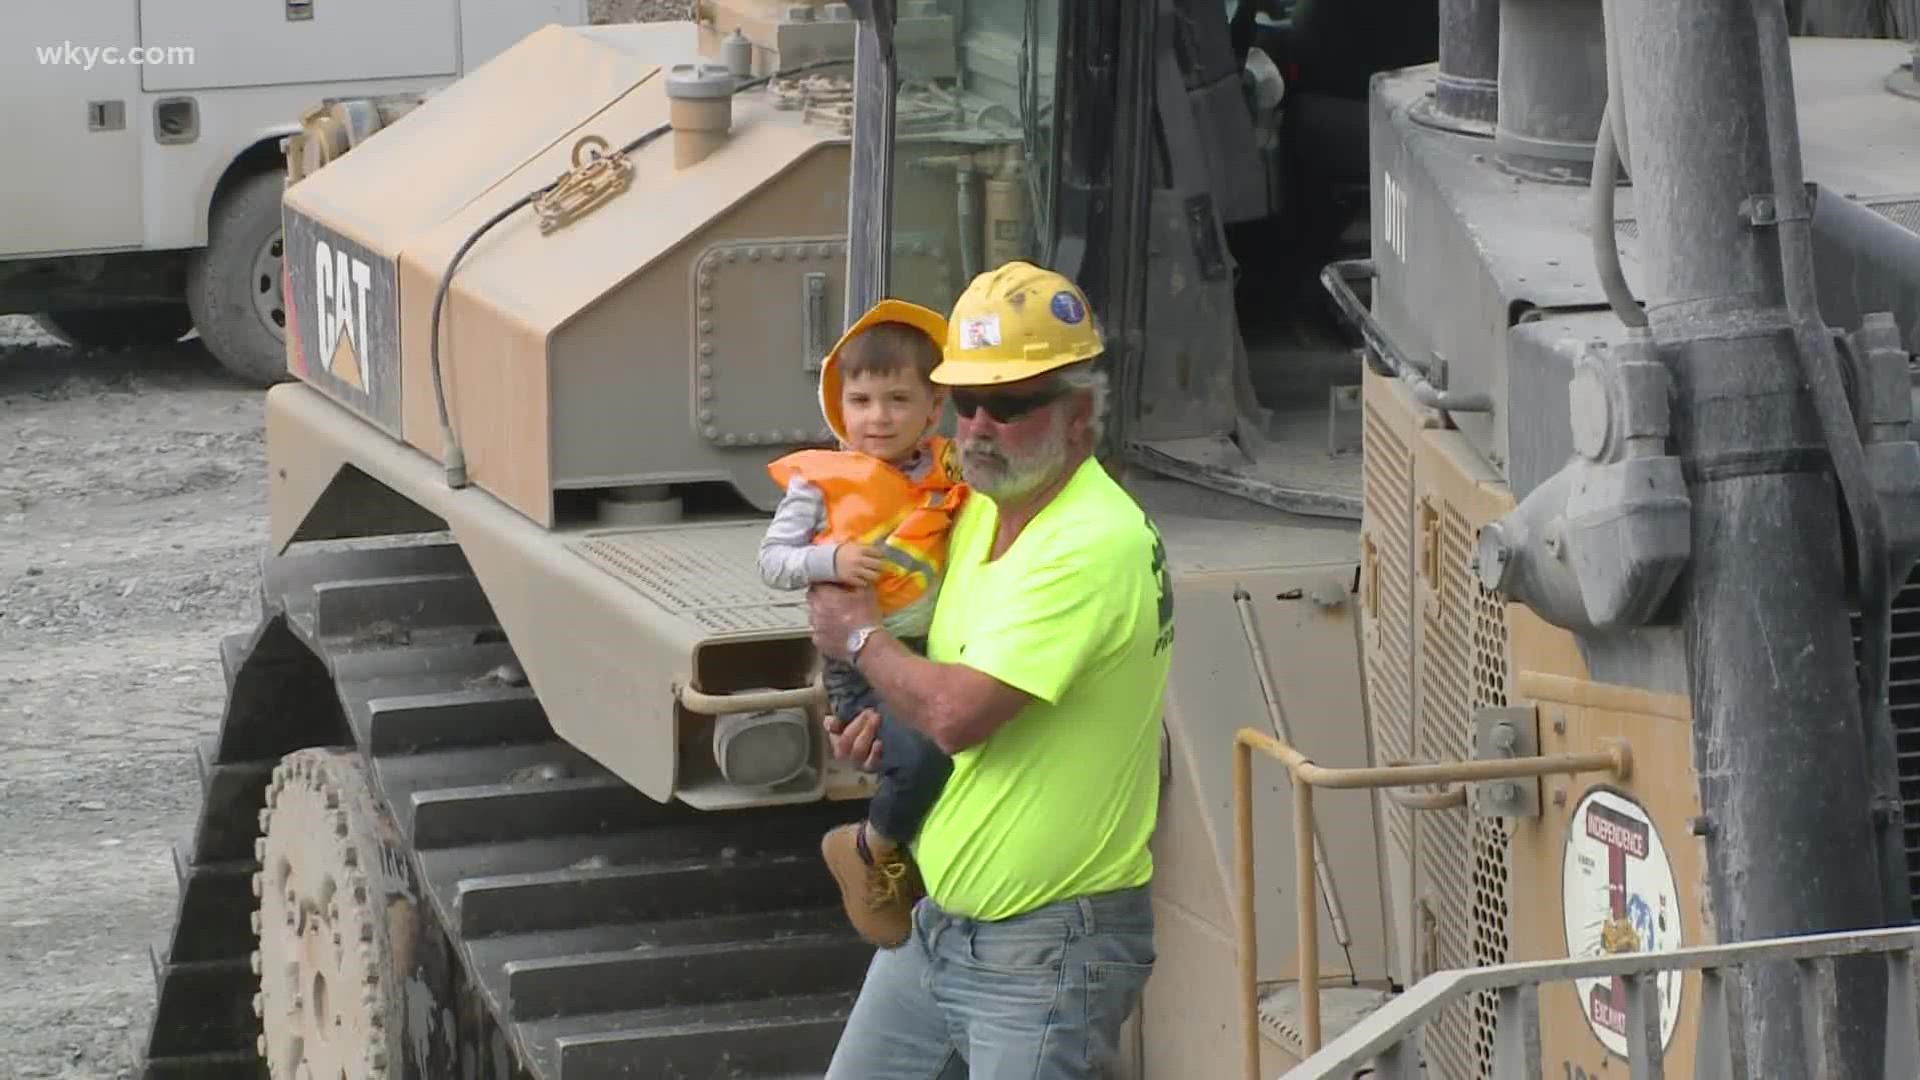 A 4-year-old boy received a very special experience Friday thanks to the Cleveland chapter of A Special Wish and Independence Excavating.